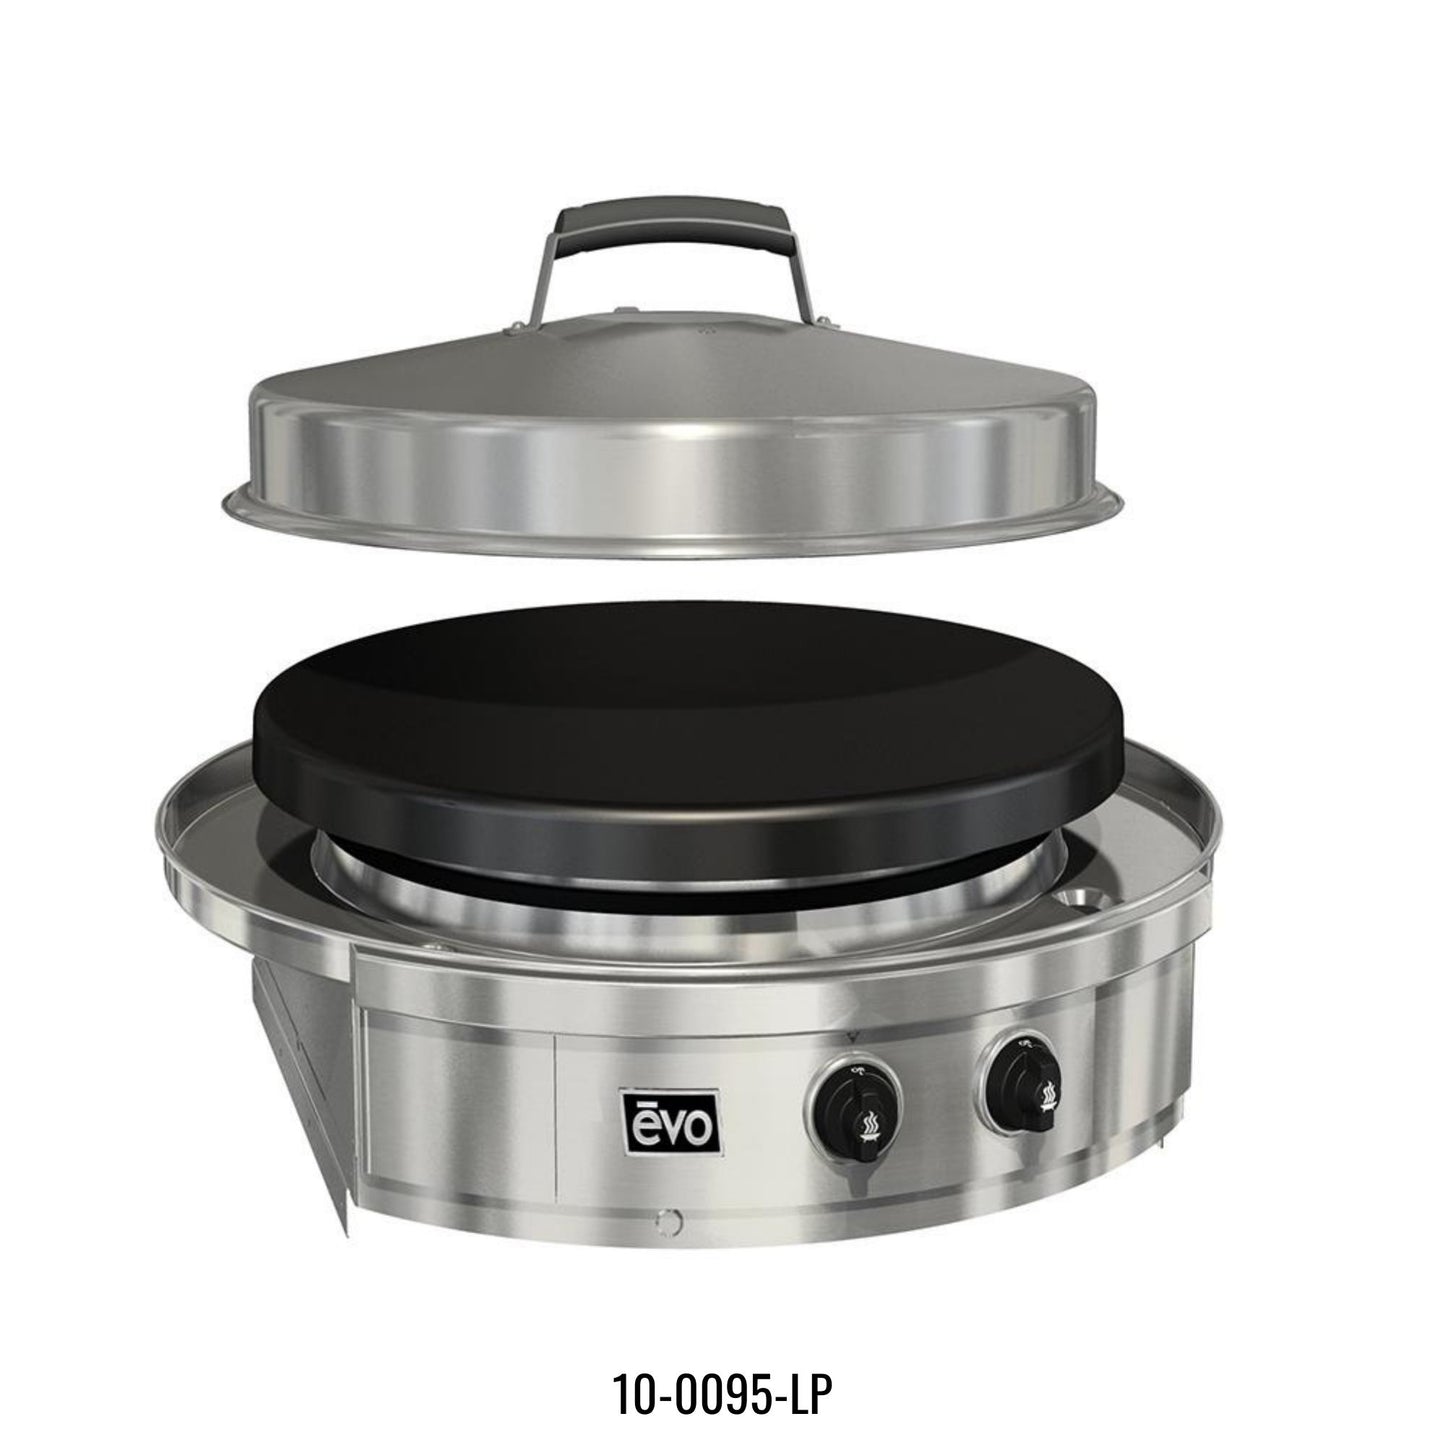 EVO AFFINITY 25G DROP-IN WITH SEASONED COOKSURFACE LP GAS - FOR OUTDOOR USE